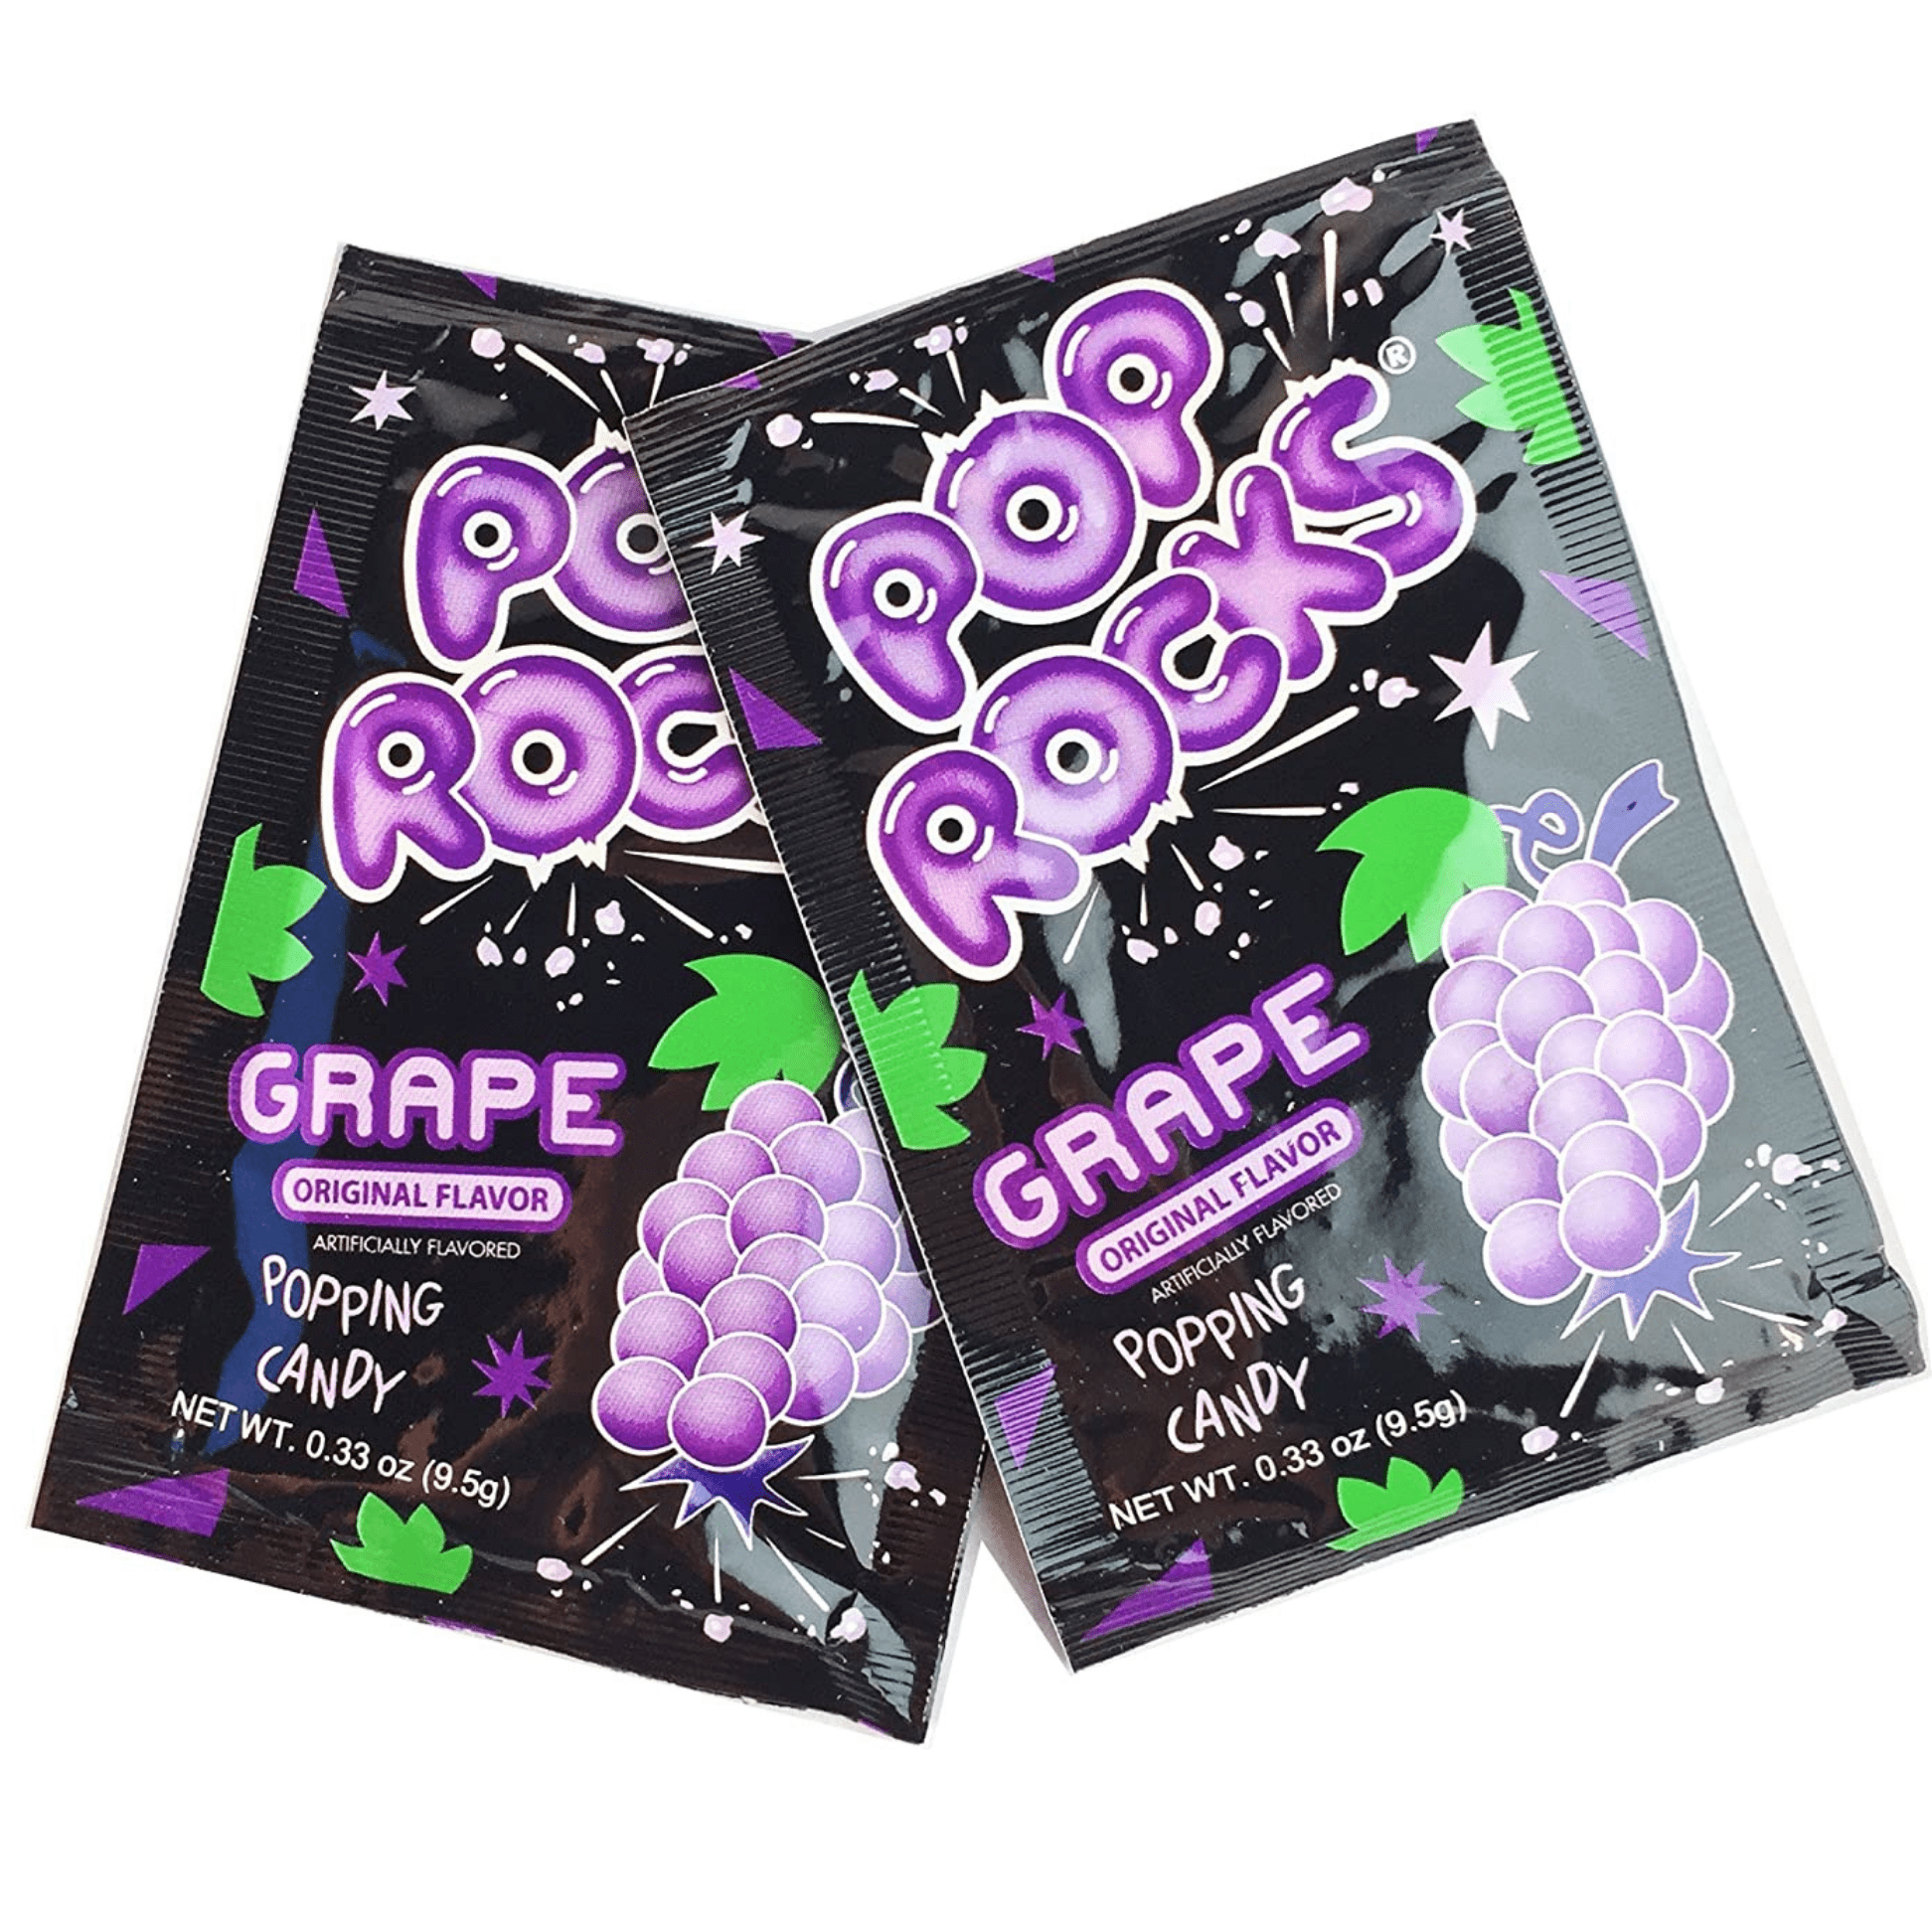 Pop Rocks Variety Mix - 32 Pack of 8 Flavors - Retro Crackling Rock Candy -  Bulk Pack Includes Tropical Punch, Bubble Gum, Cherry, and Much More